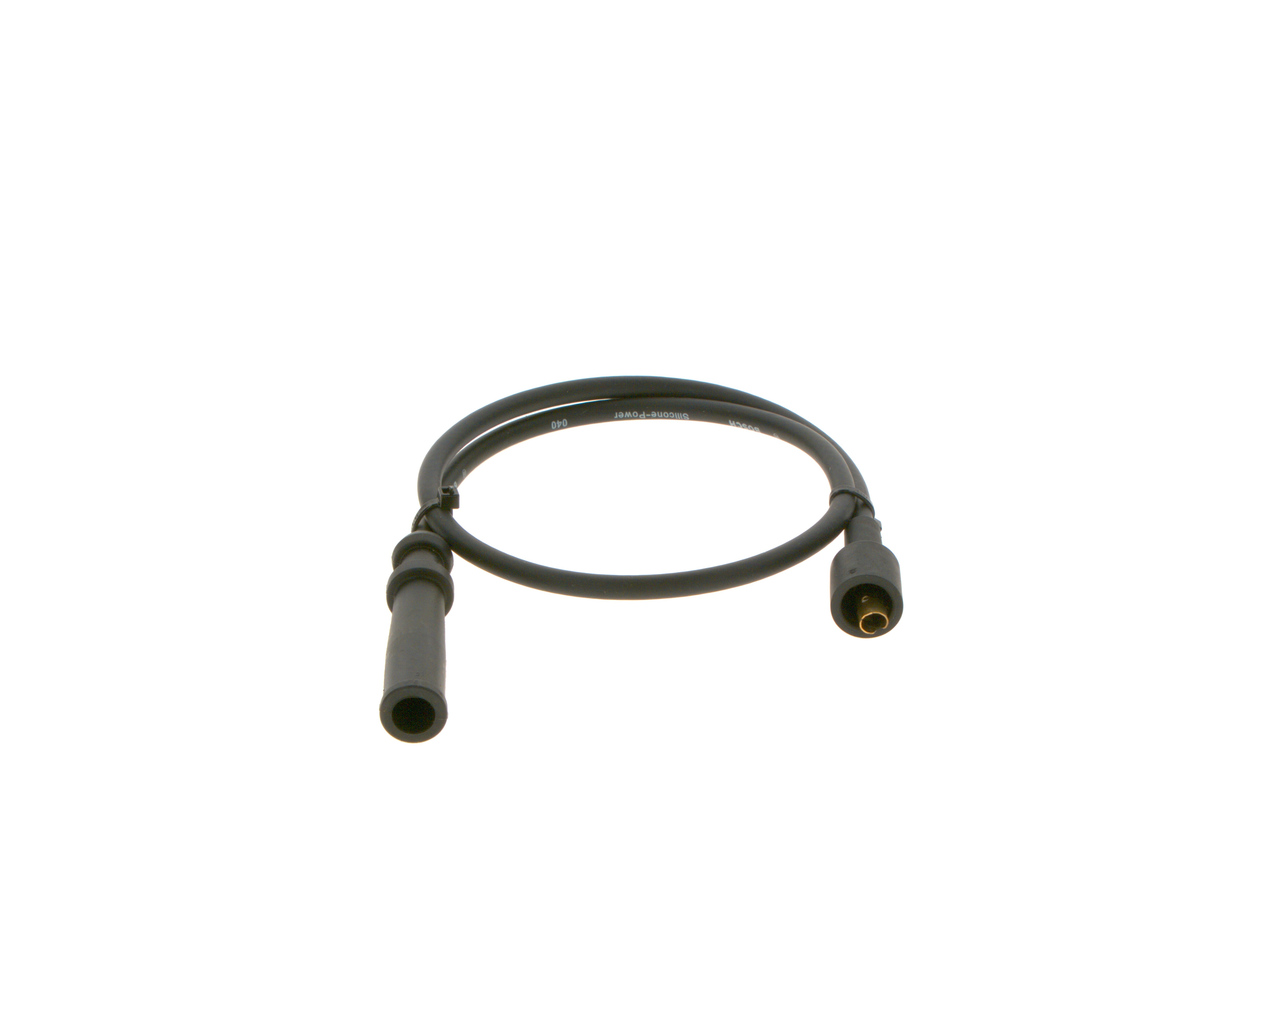 Image of BOSCH Ignition Lead Set VOLVO 0 986 356 773 1276331,2708006,2708980 Ignition Cable Set,Ignition Wire Set,Ignition Cable Kit,Ignition Lead Kit 272193